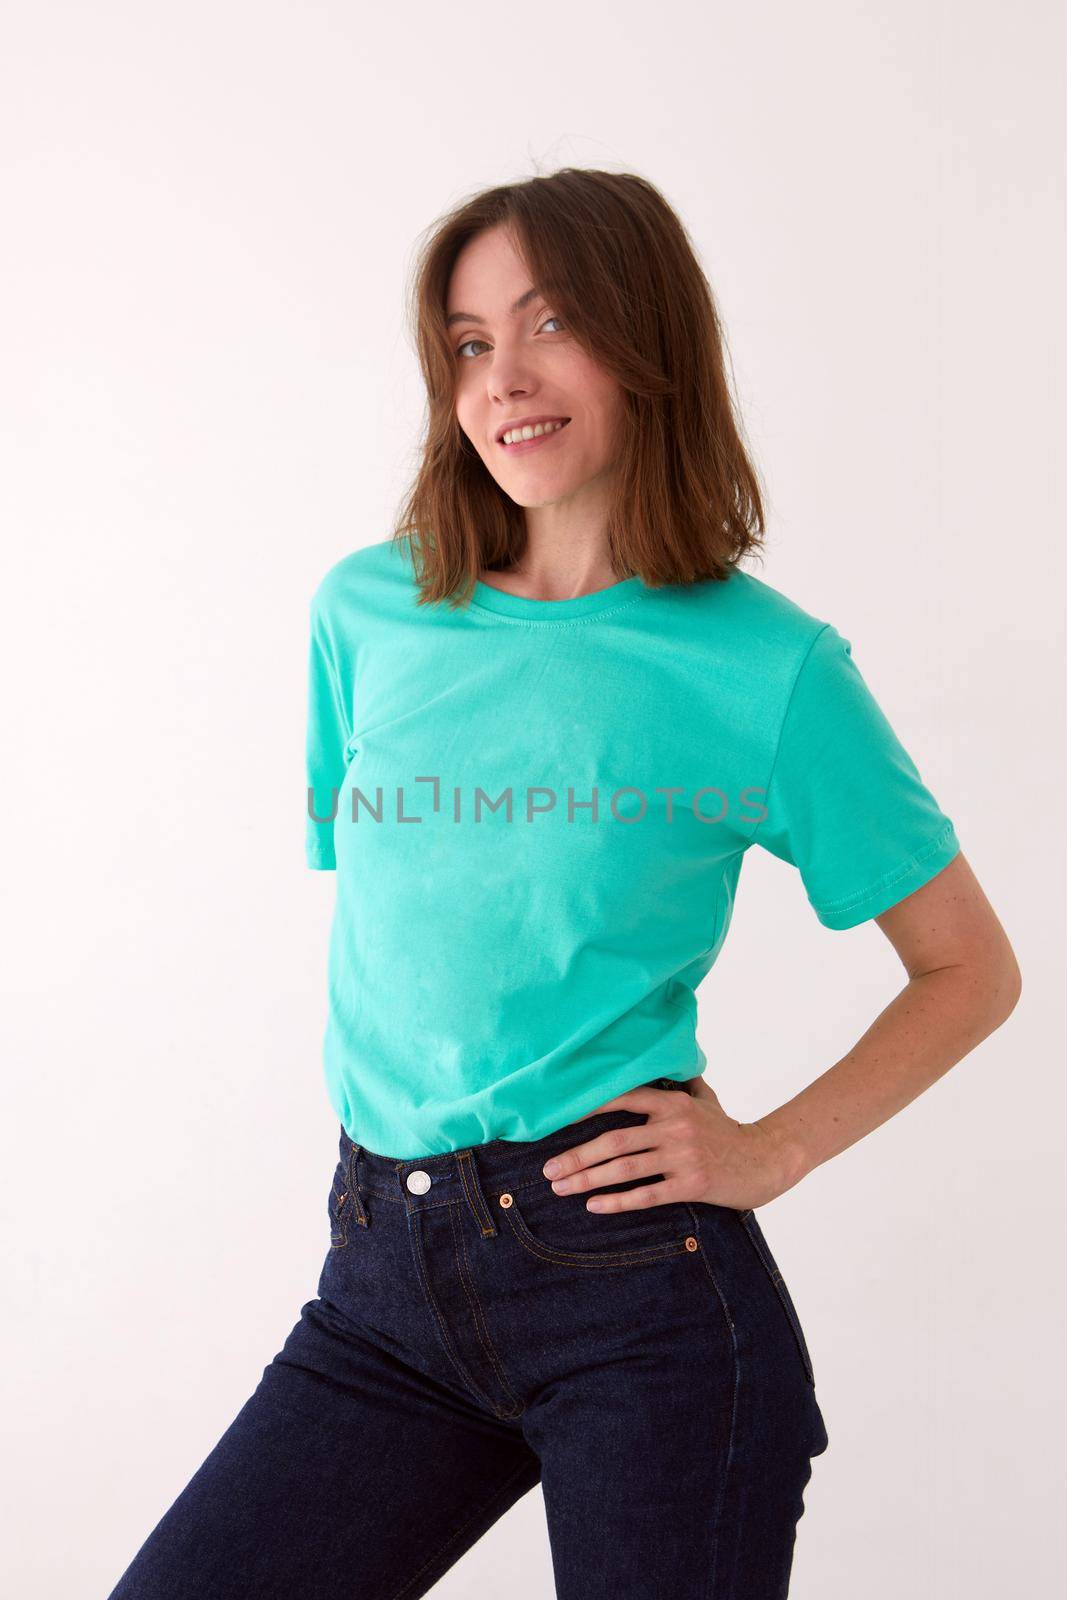 Positive female model wearing t shirt and jeans standing with hands on waist against white background and looking at camera